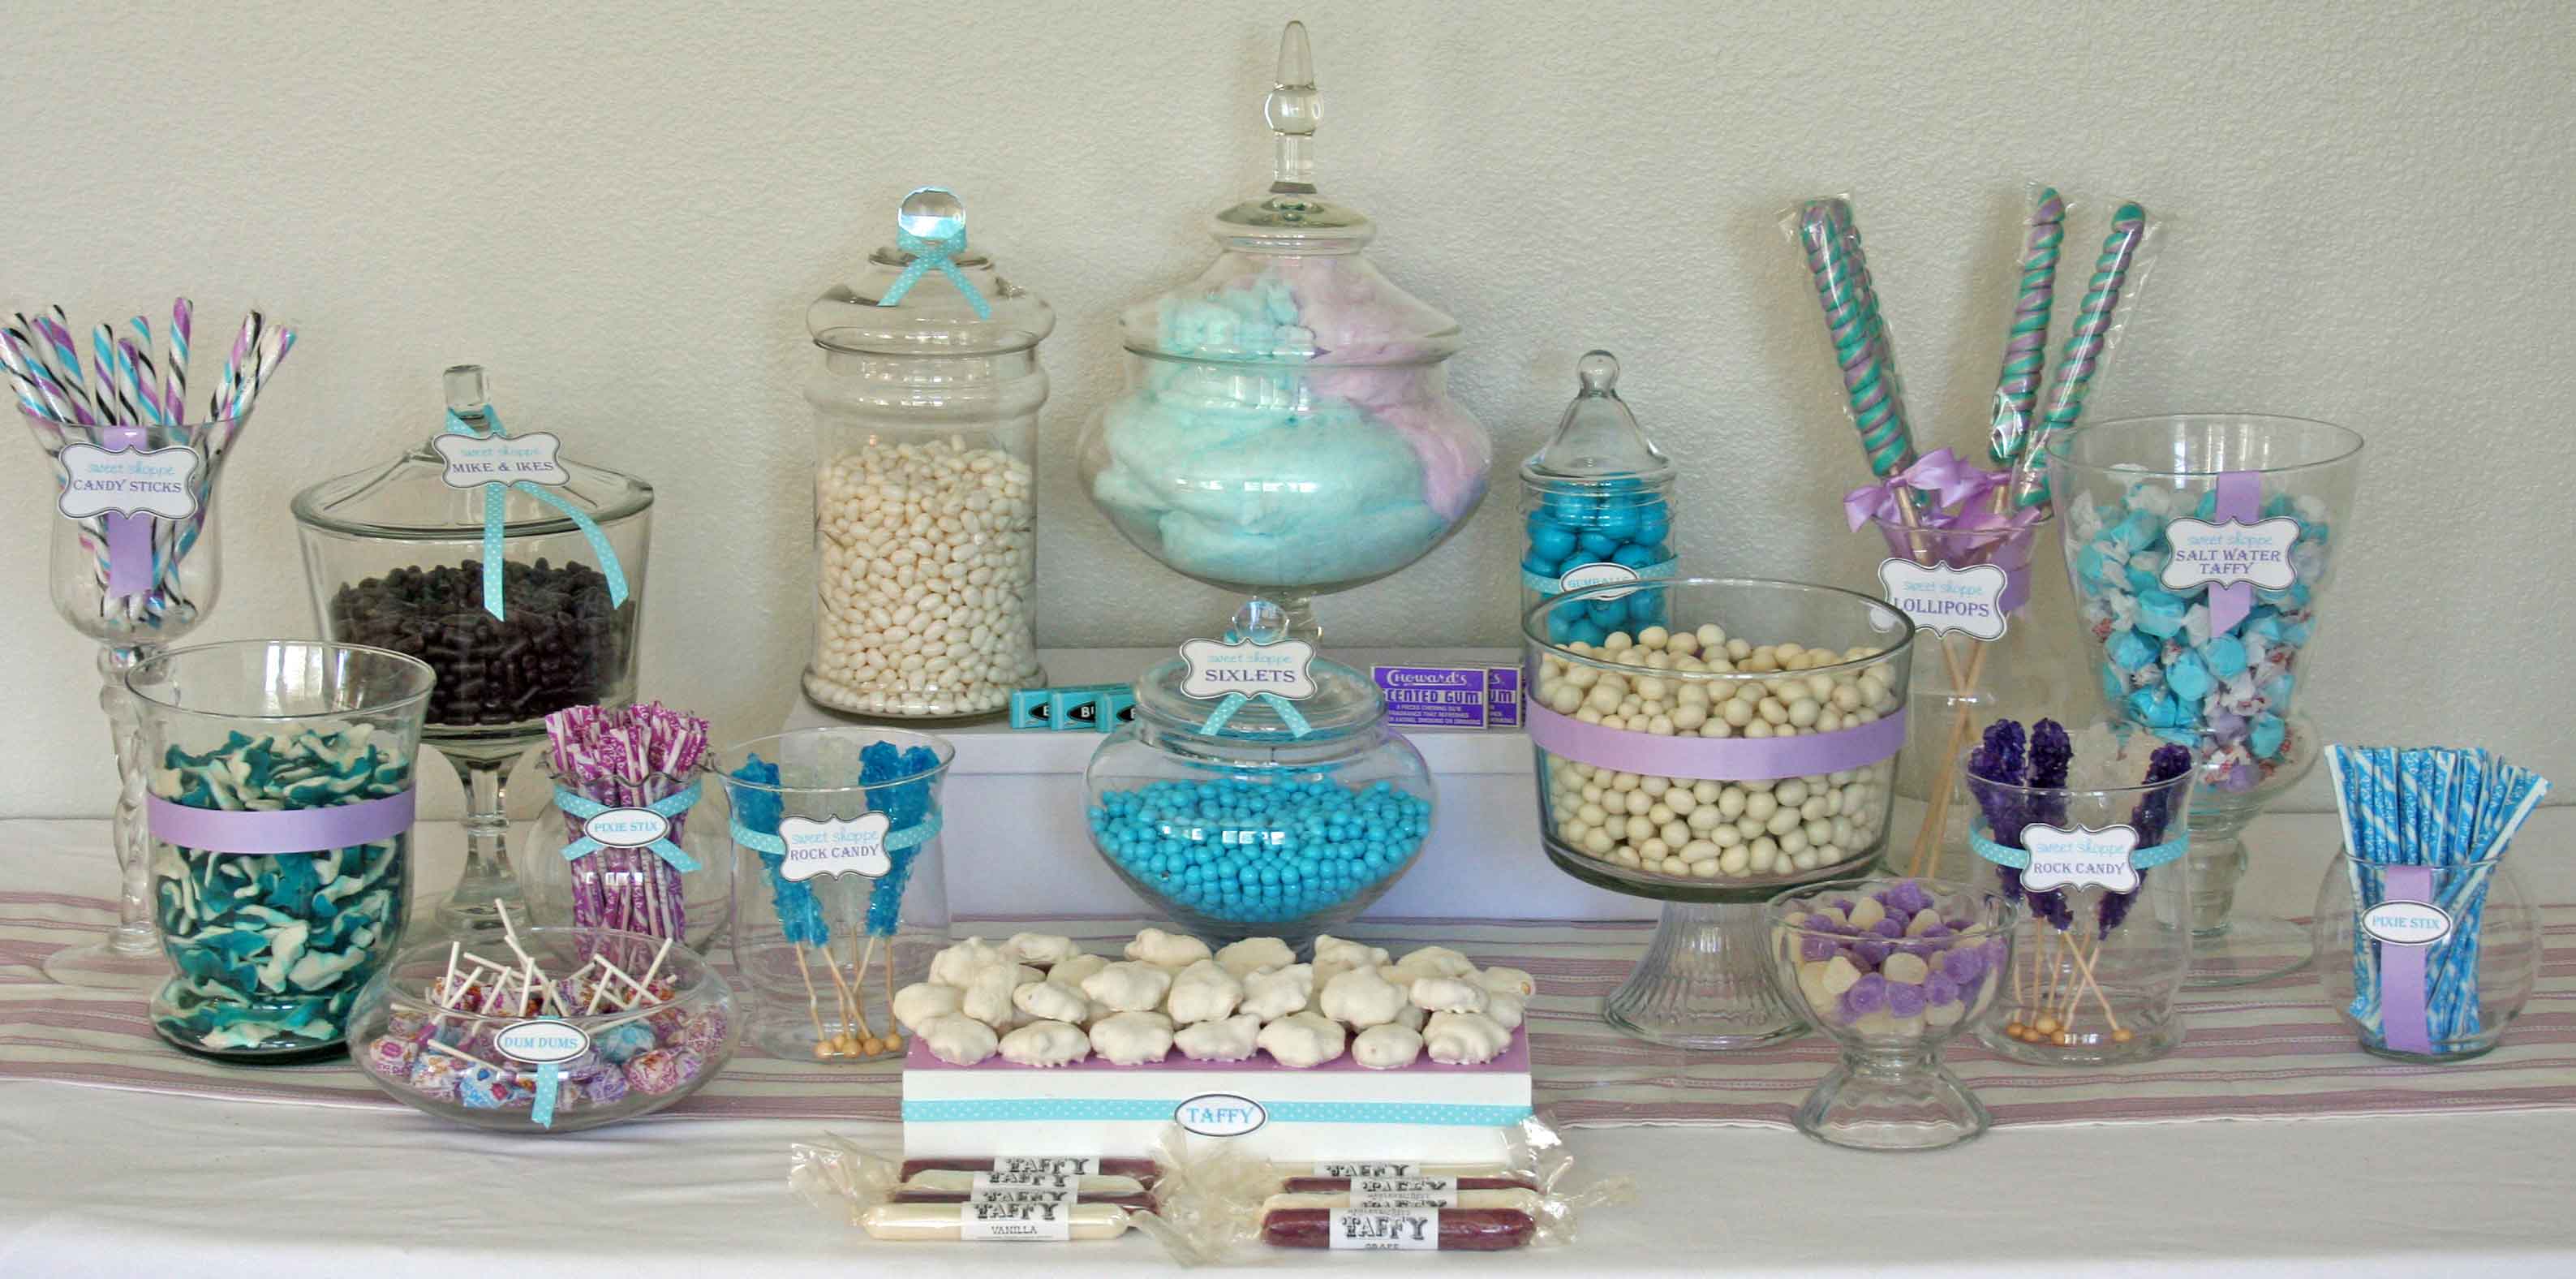 The candy buffet.